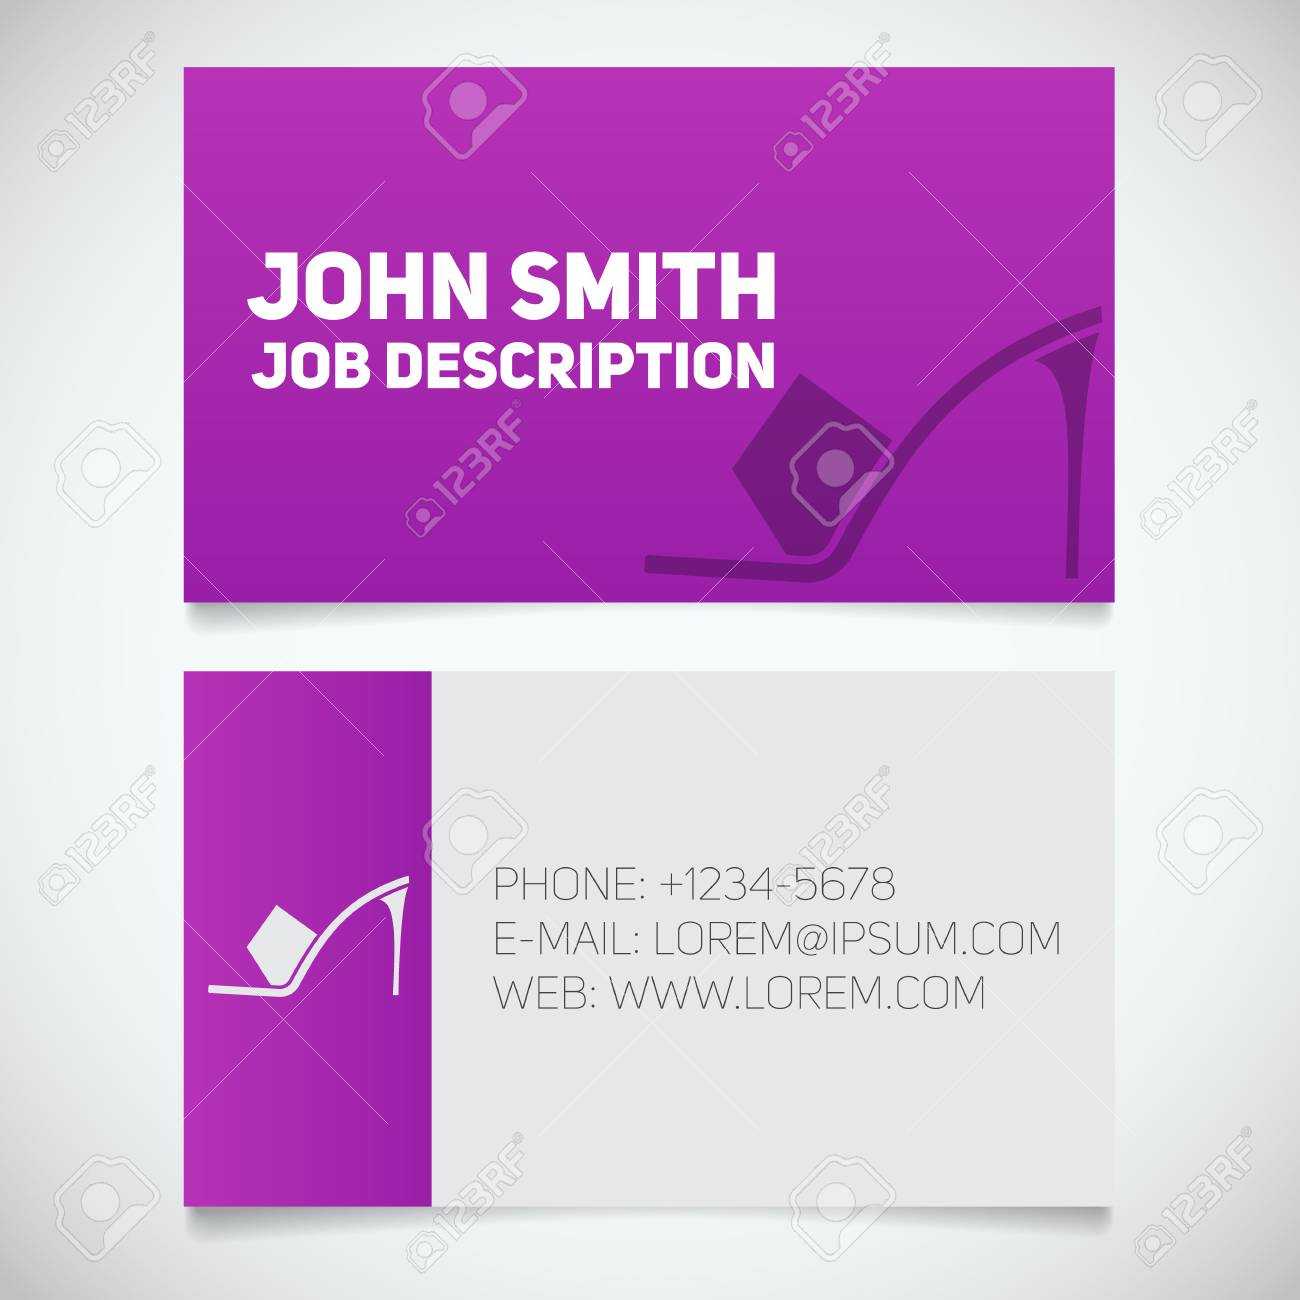 Business Card Print Template With High Heel Shoe Logo. Manager In High Heel Template For Cards